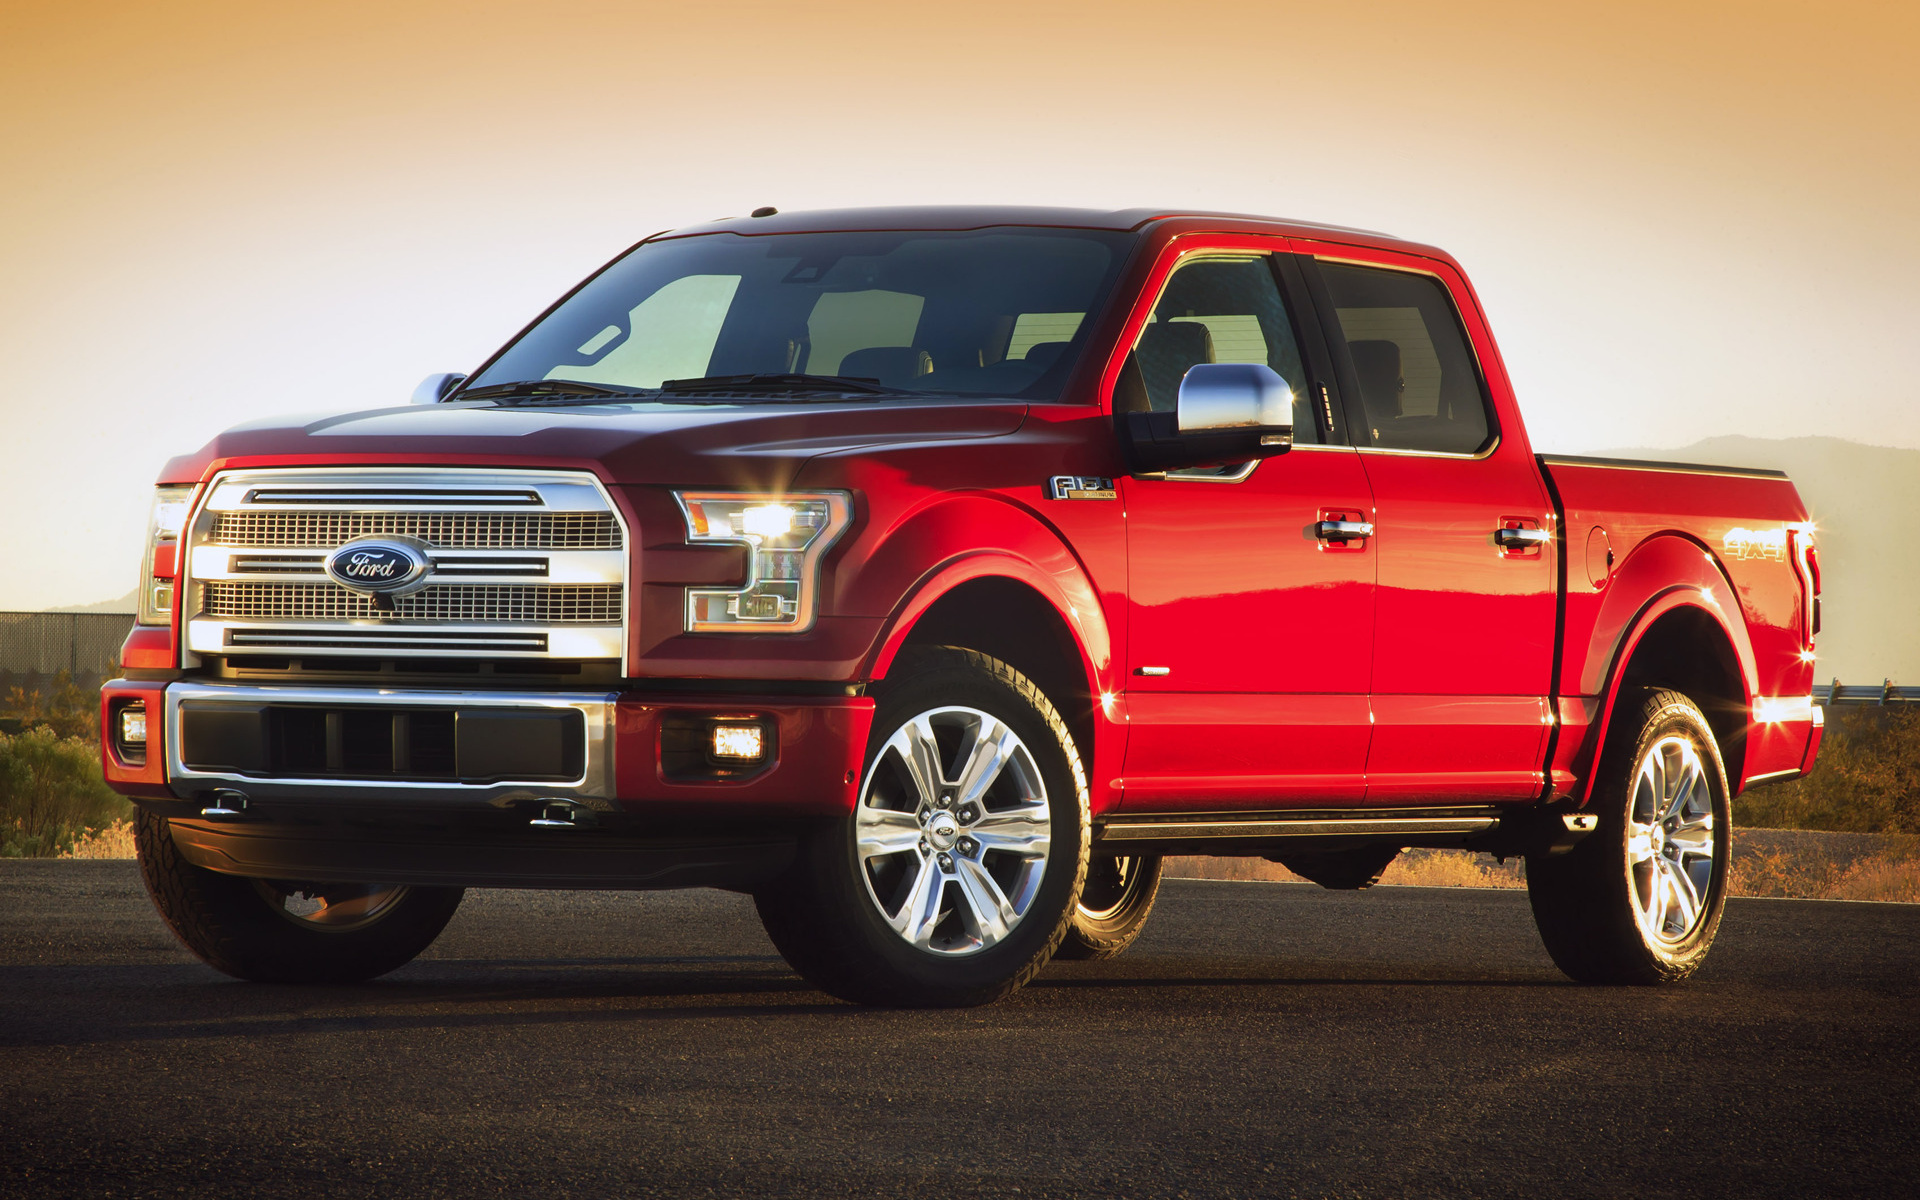 2015 Ford F-150 Platinum SuperCrew - Wallpapers and HD Images | Car Pixel 2011 Ford F 150 5.0 Towing Capacity